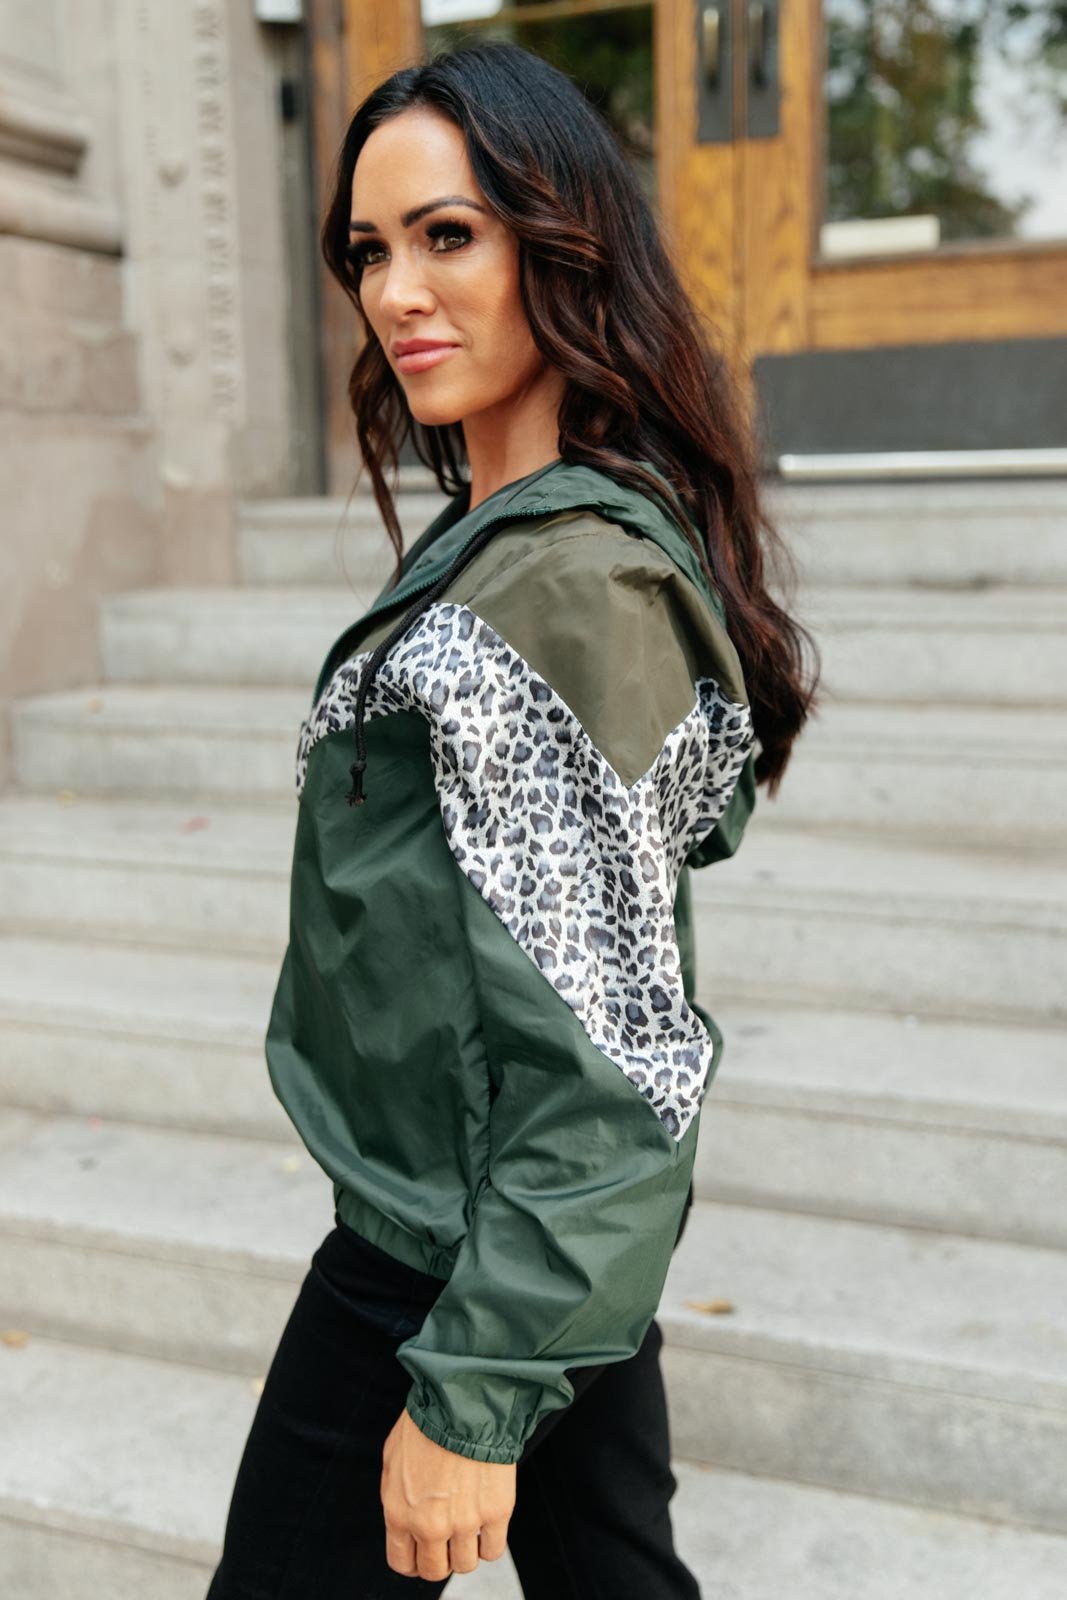 Make Your Move Windbreaker in Olive - Driftwood Boutique